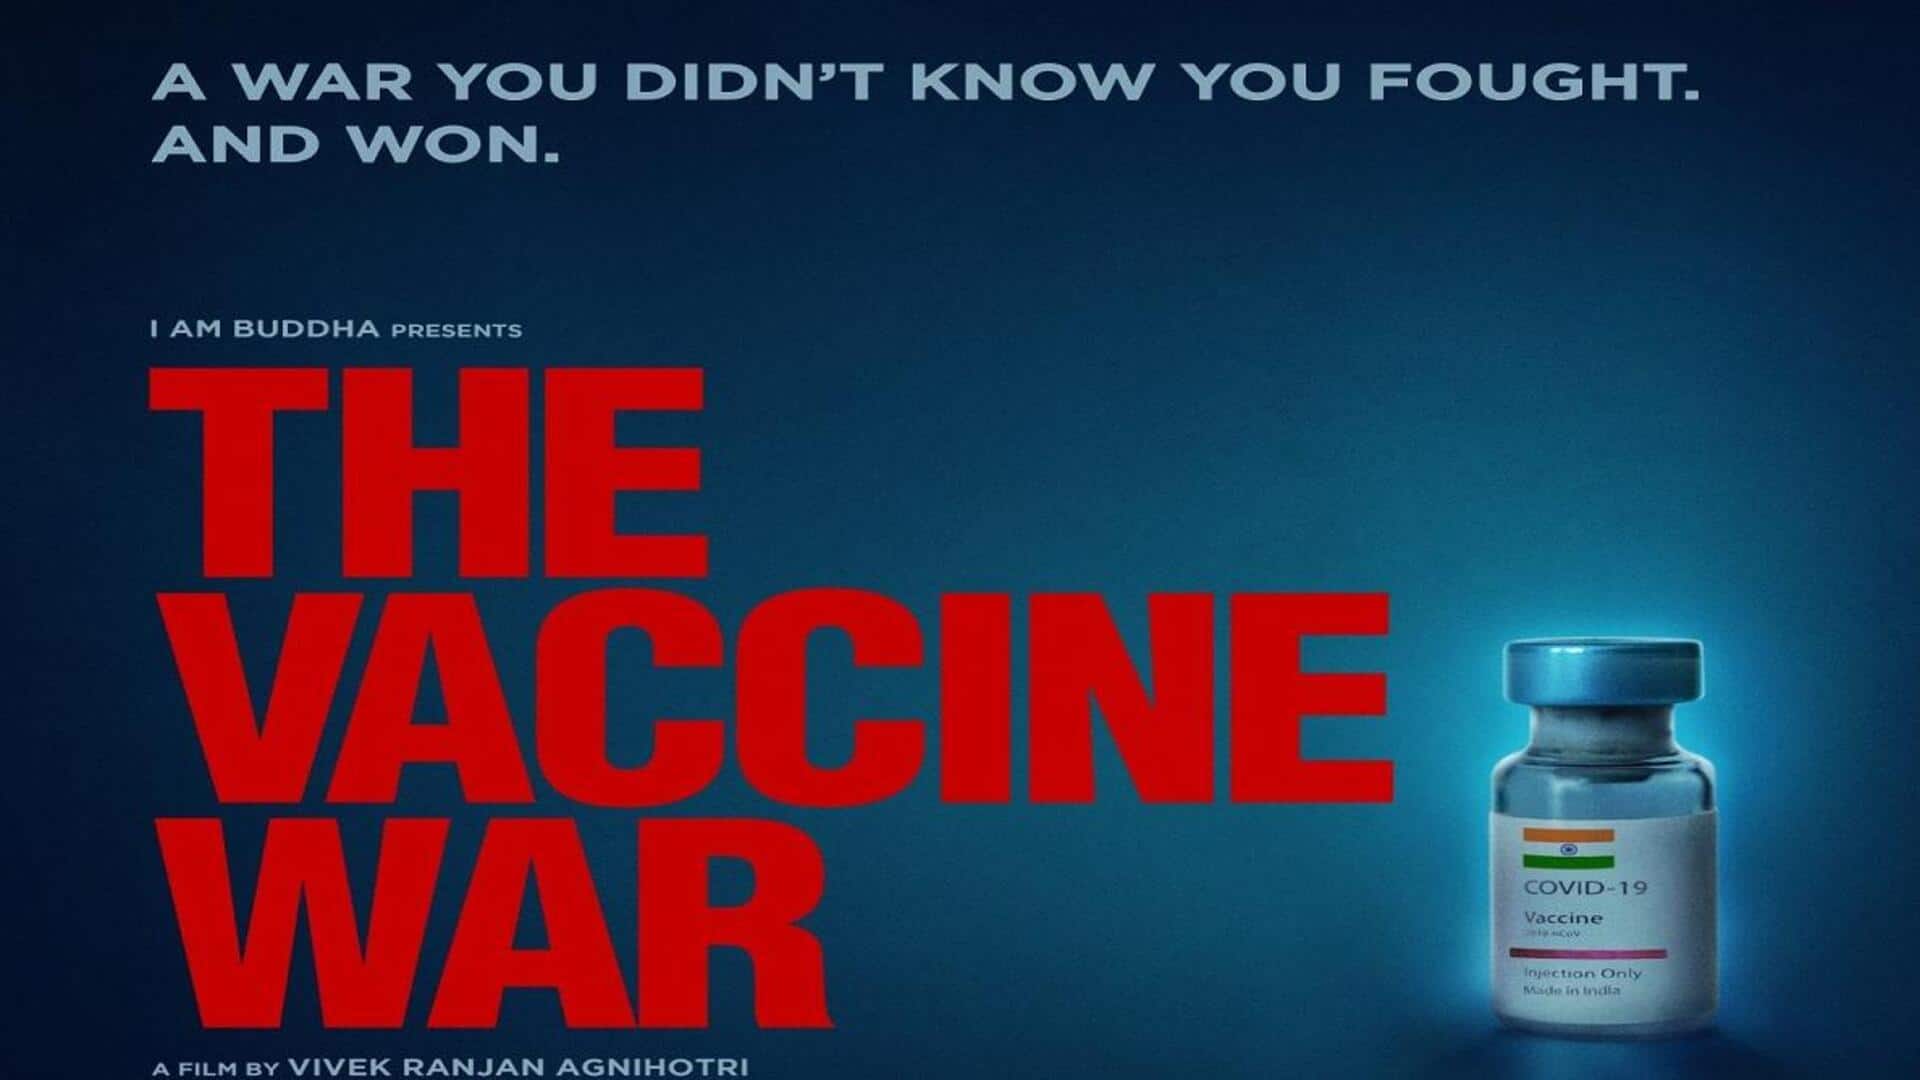 Box office collection: 'The Vaccine War' registers an underwhelming start